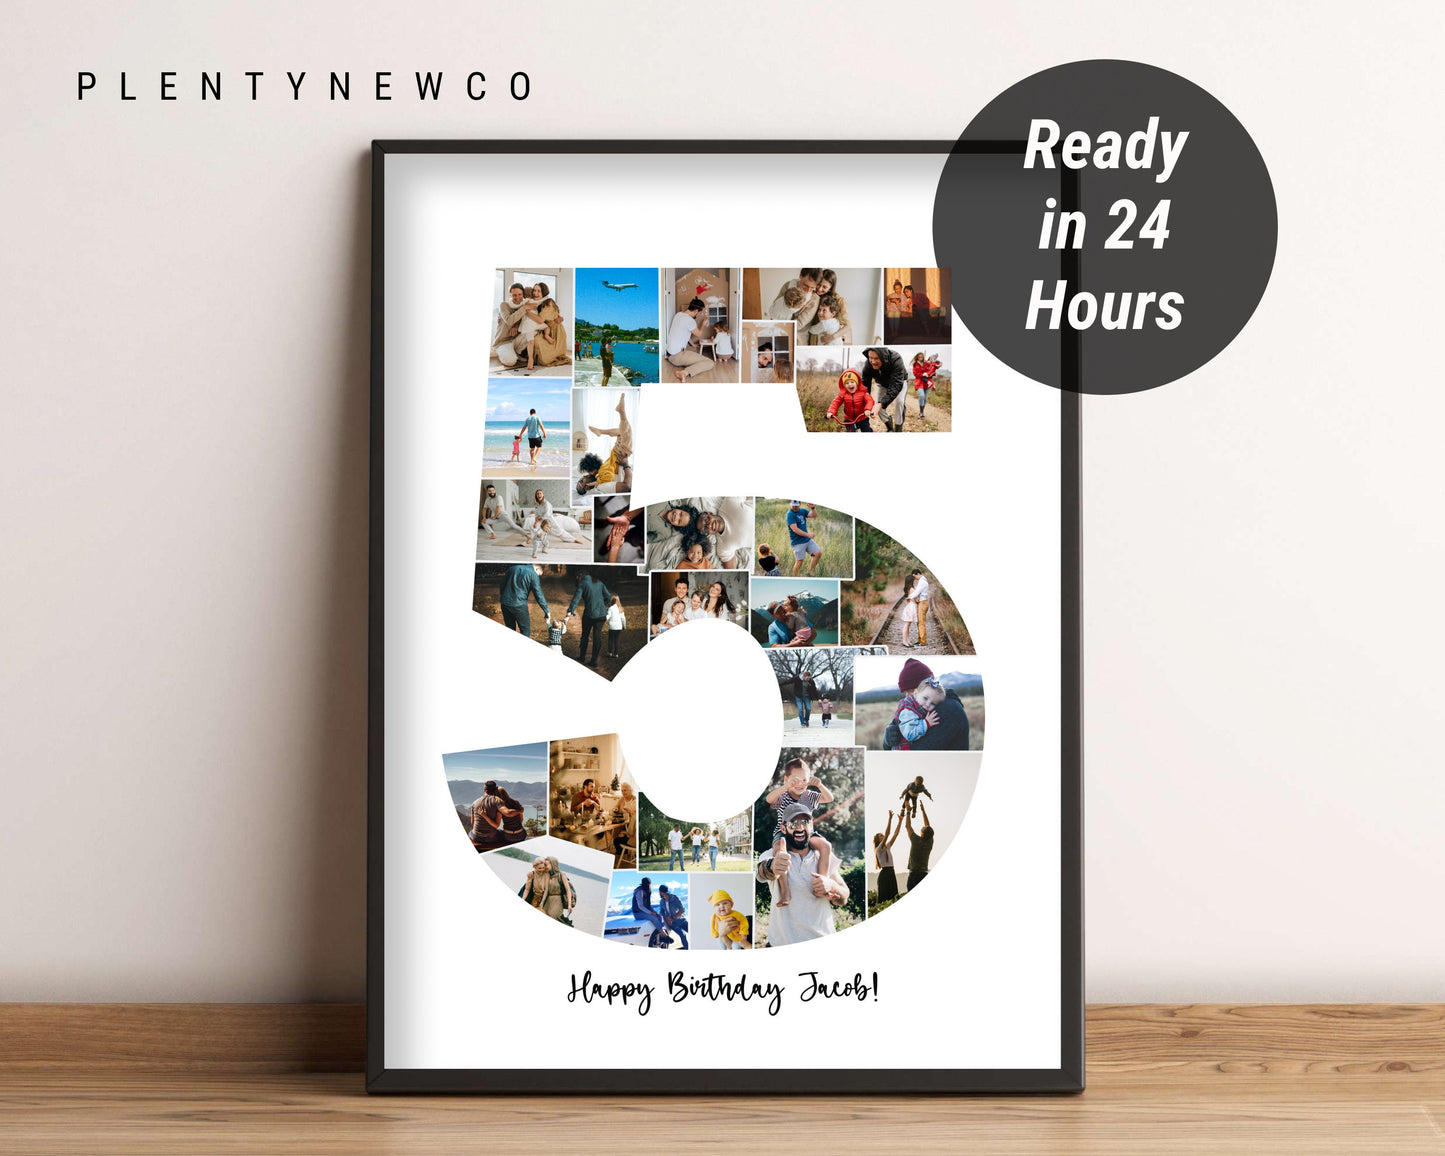 5th Anniversary Gift Photo Collage, 5 Year Anniversary, Fifth Anniversary, 5th Wedding Anniversary Gift, Number 5 Photo Collage, Five Years